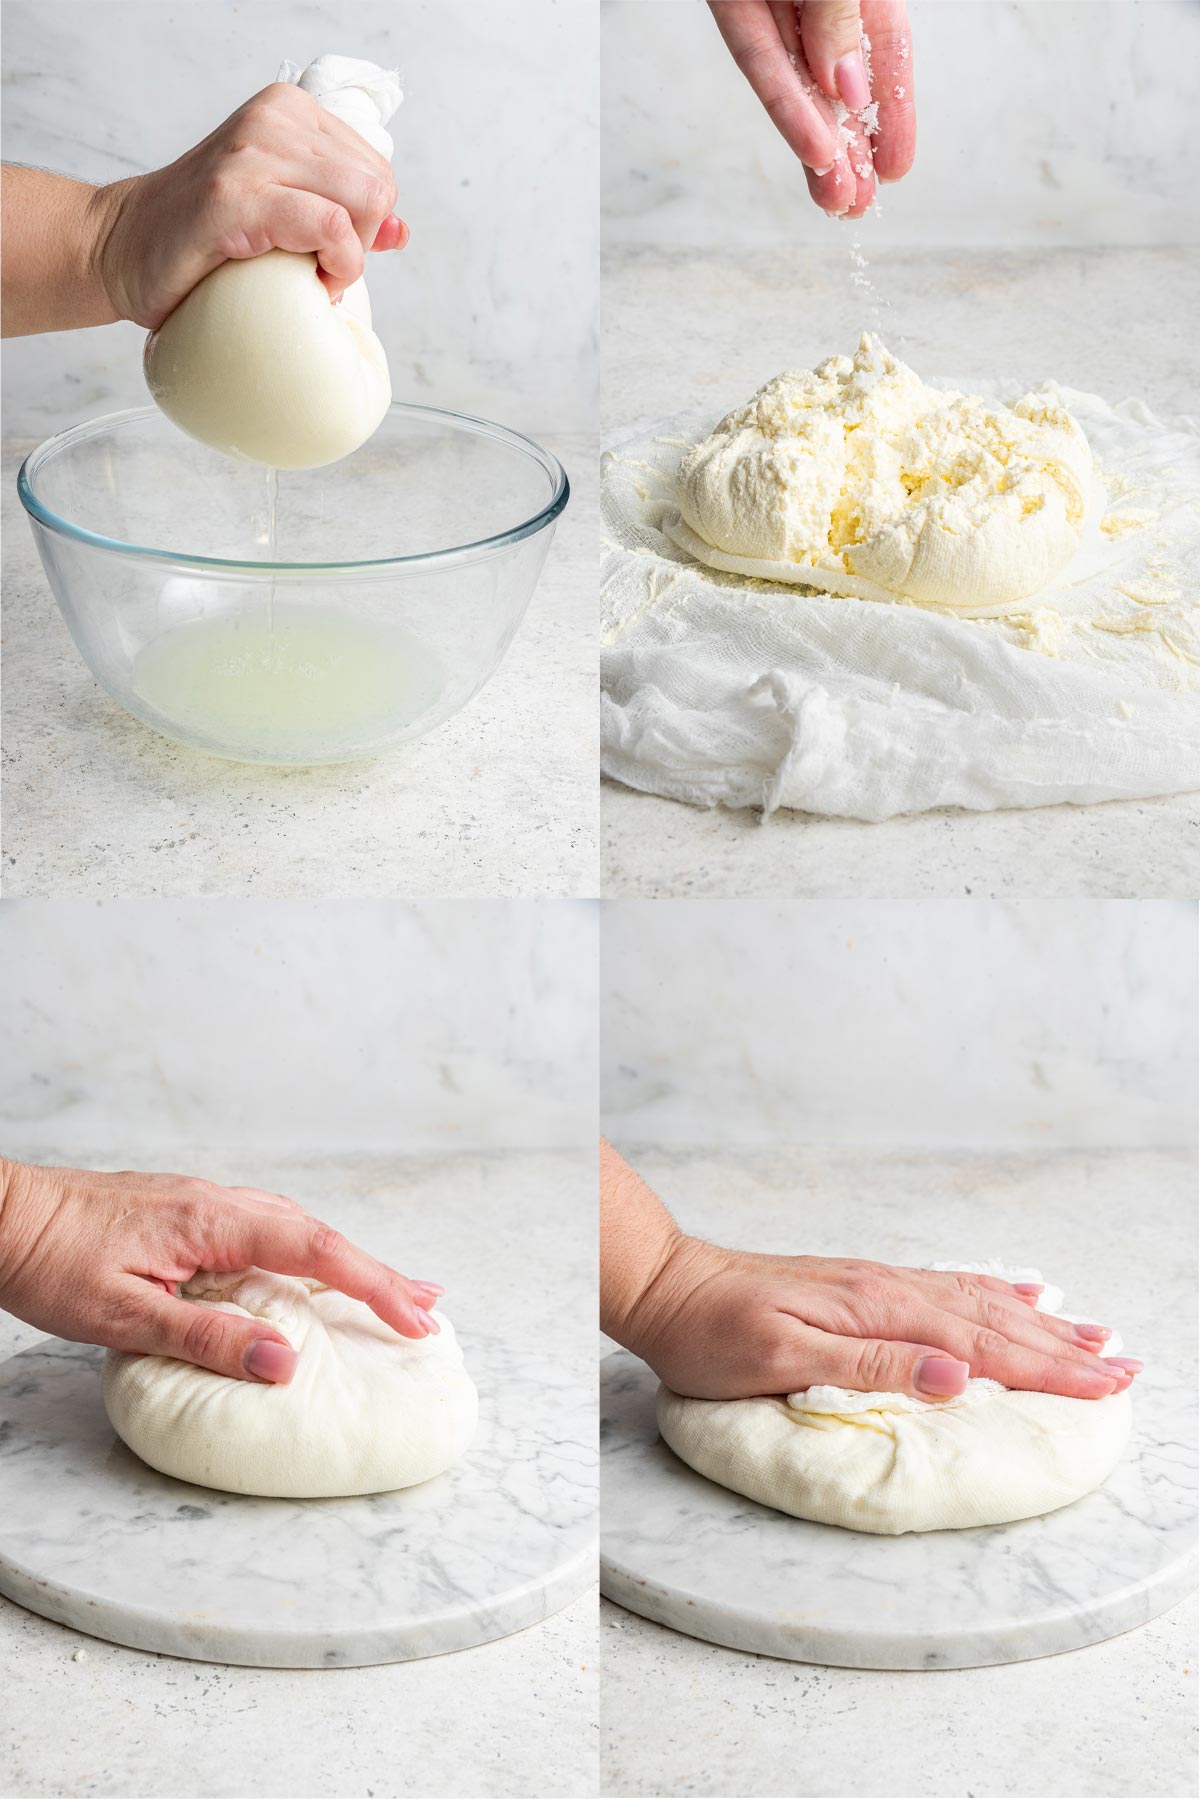 Step by step photos of extracting liquid from paneer and shaping it. 